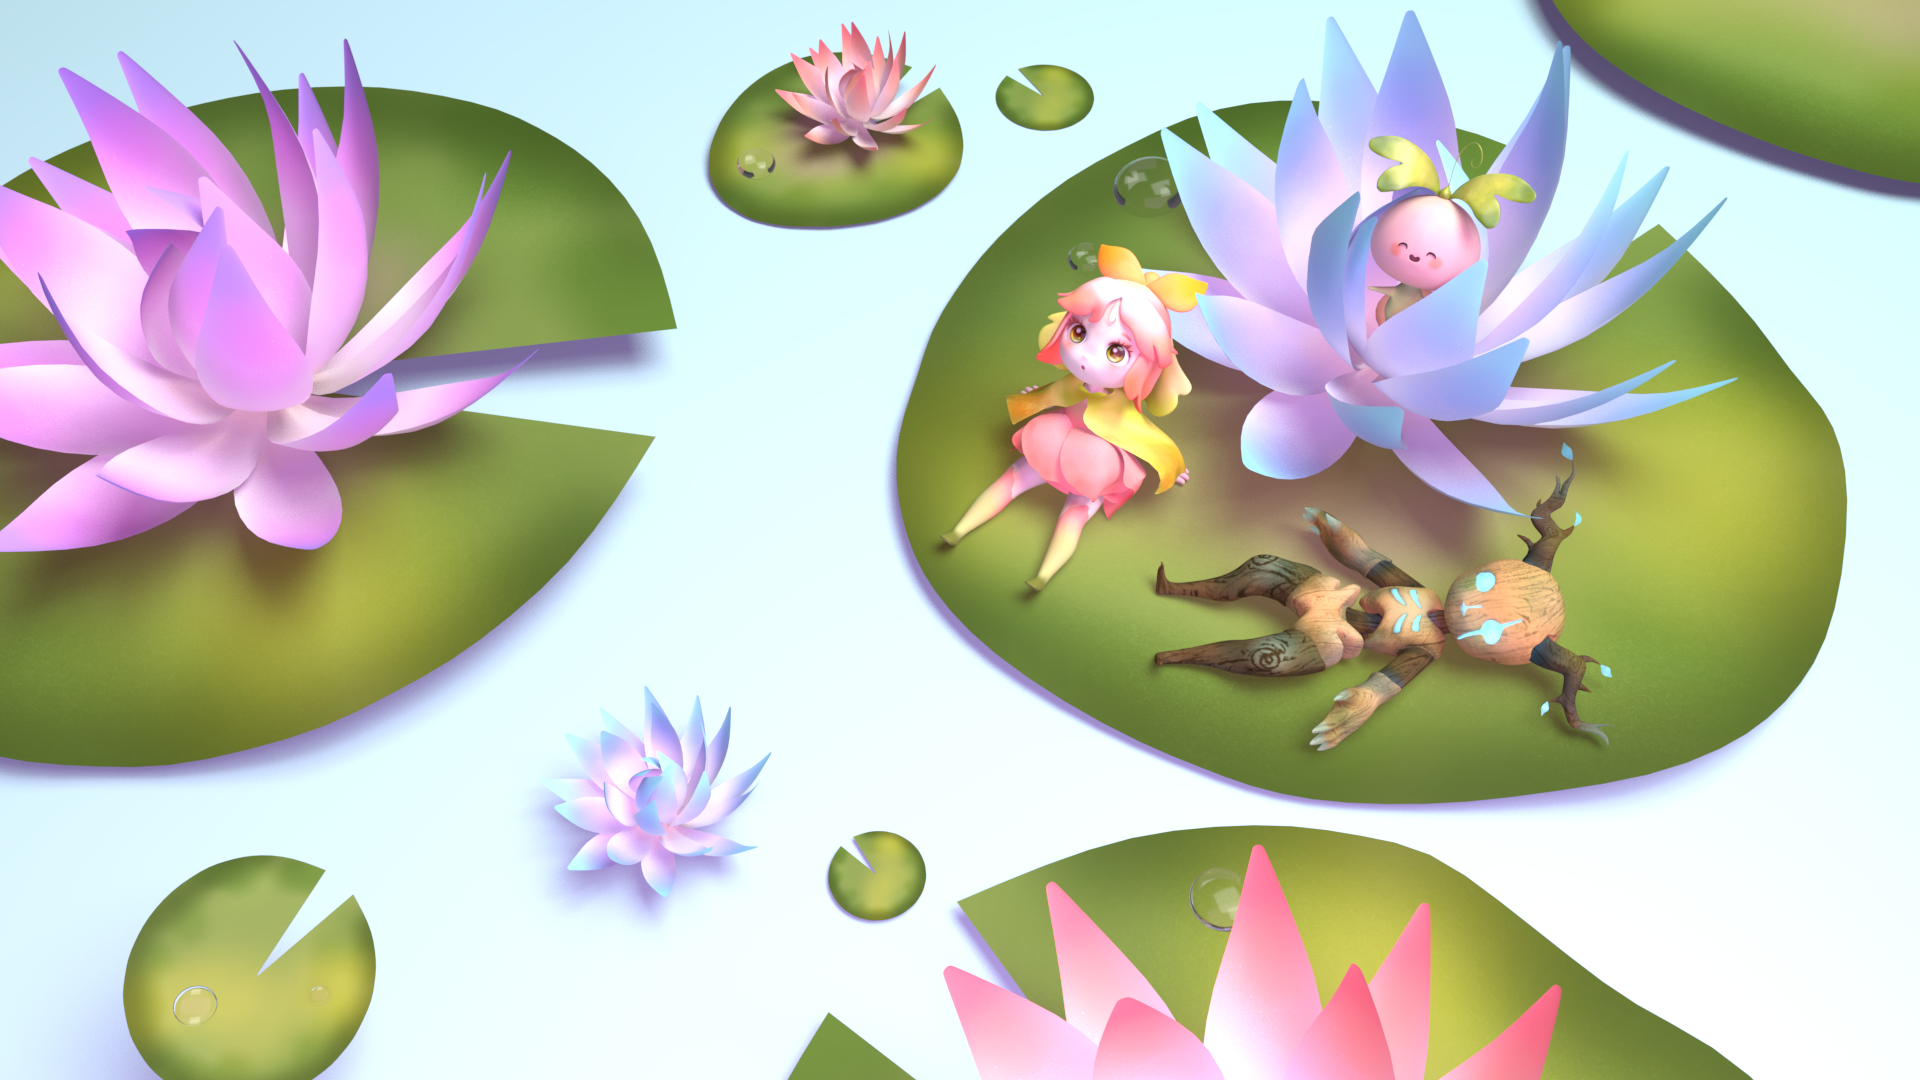 A digital graphic of a pond with lily pads and three animated characters.